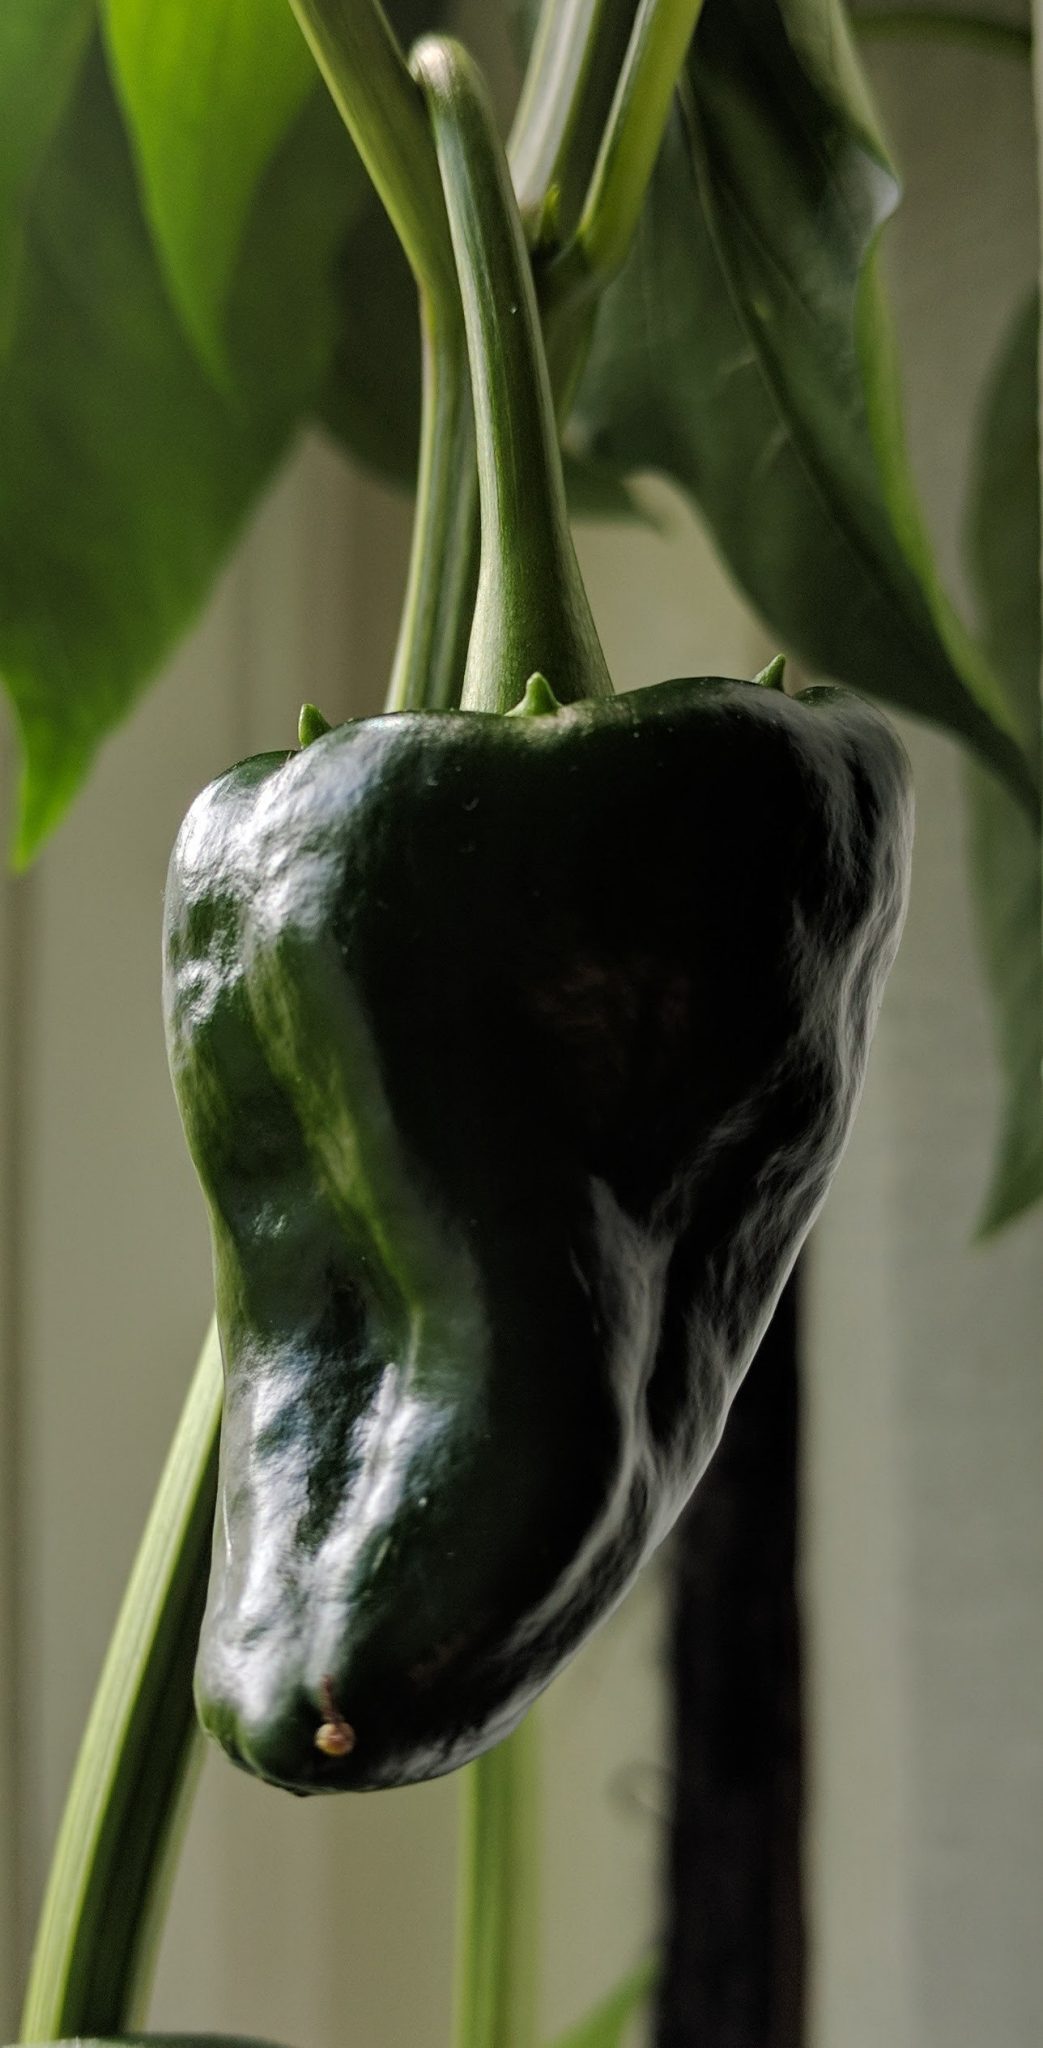 Growing Poblano Chilies Indoors